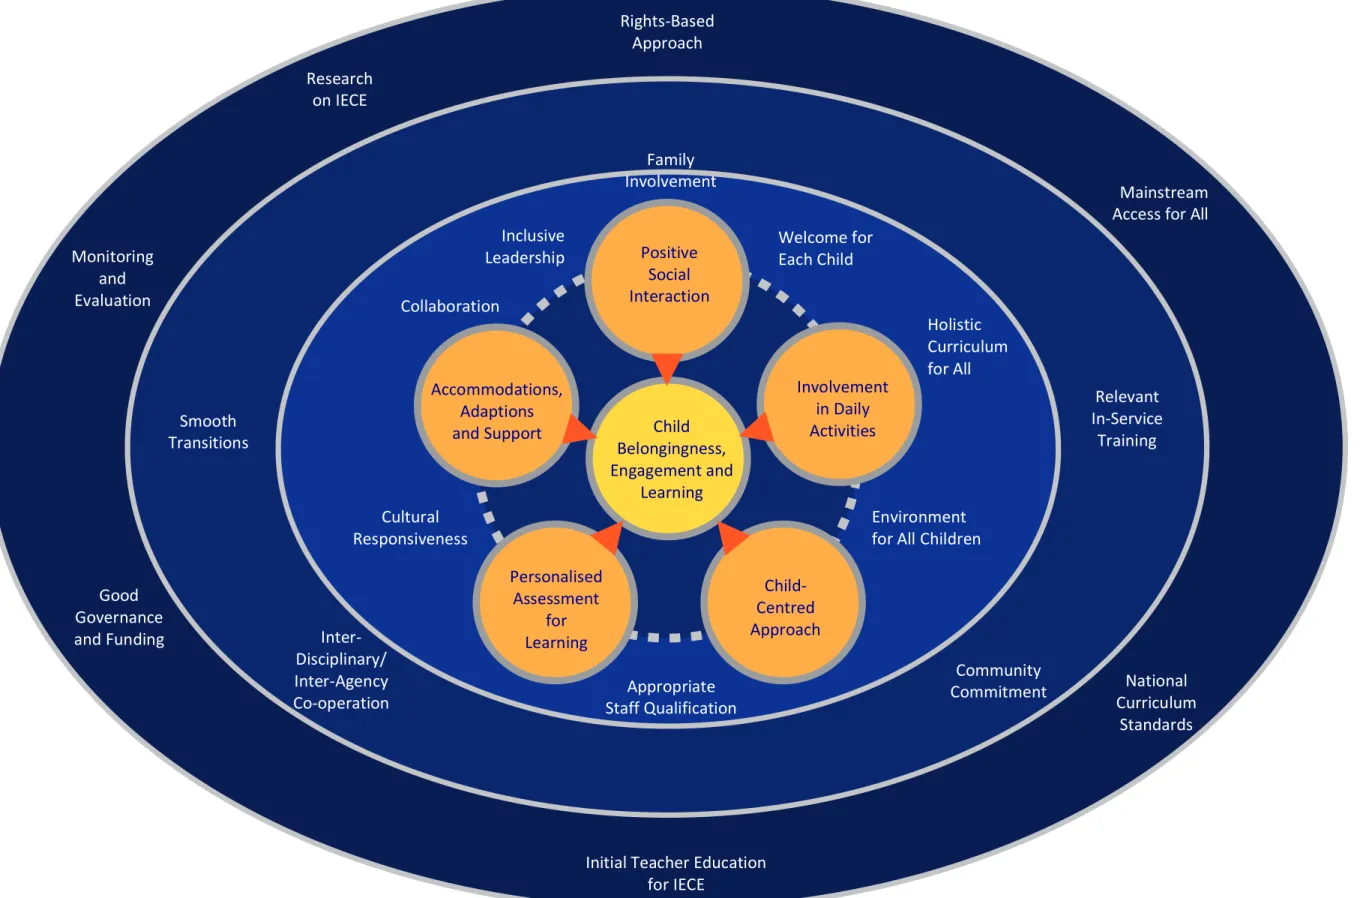 Figure	 1.	 The Ecosystem Model of Inclusive Early Childhood Education 